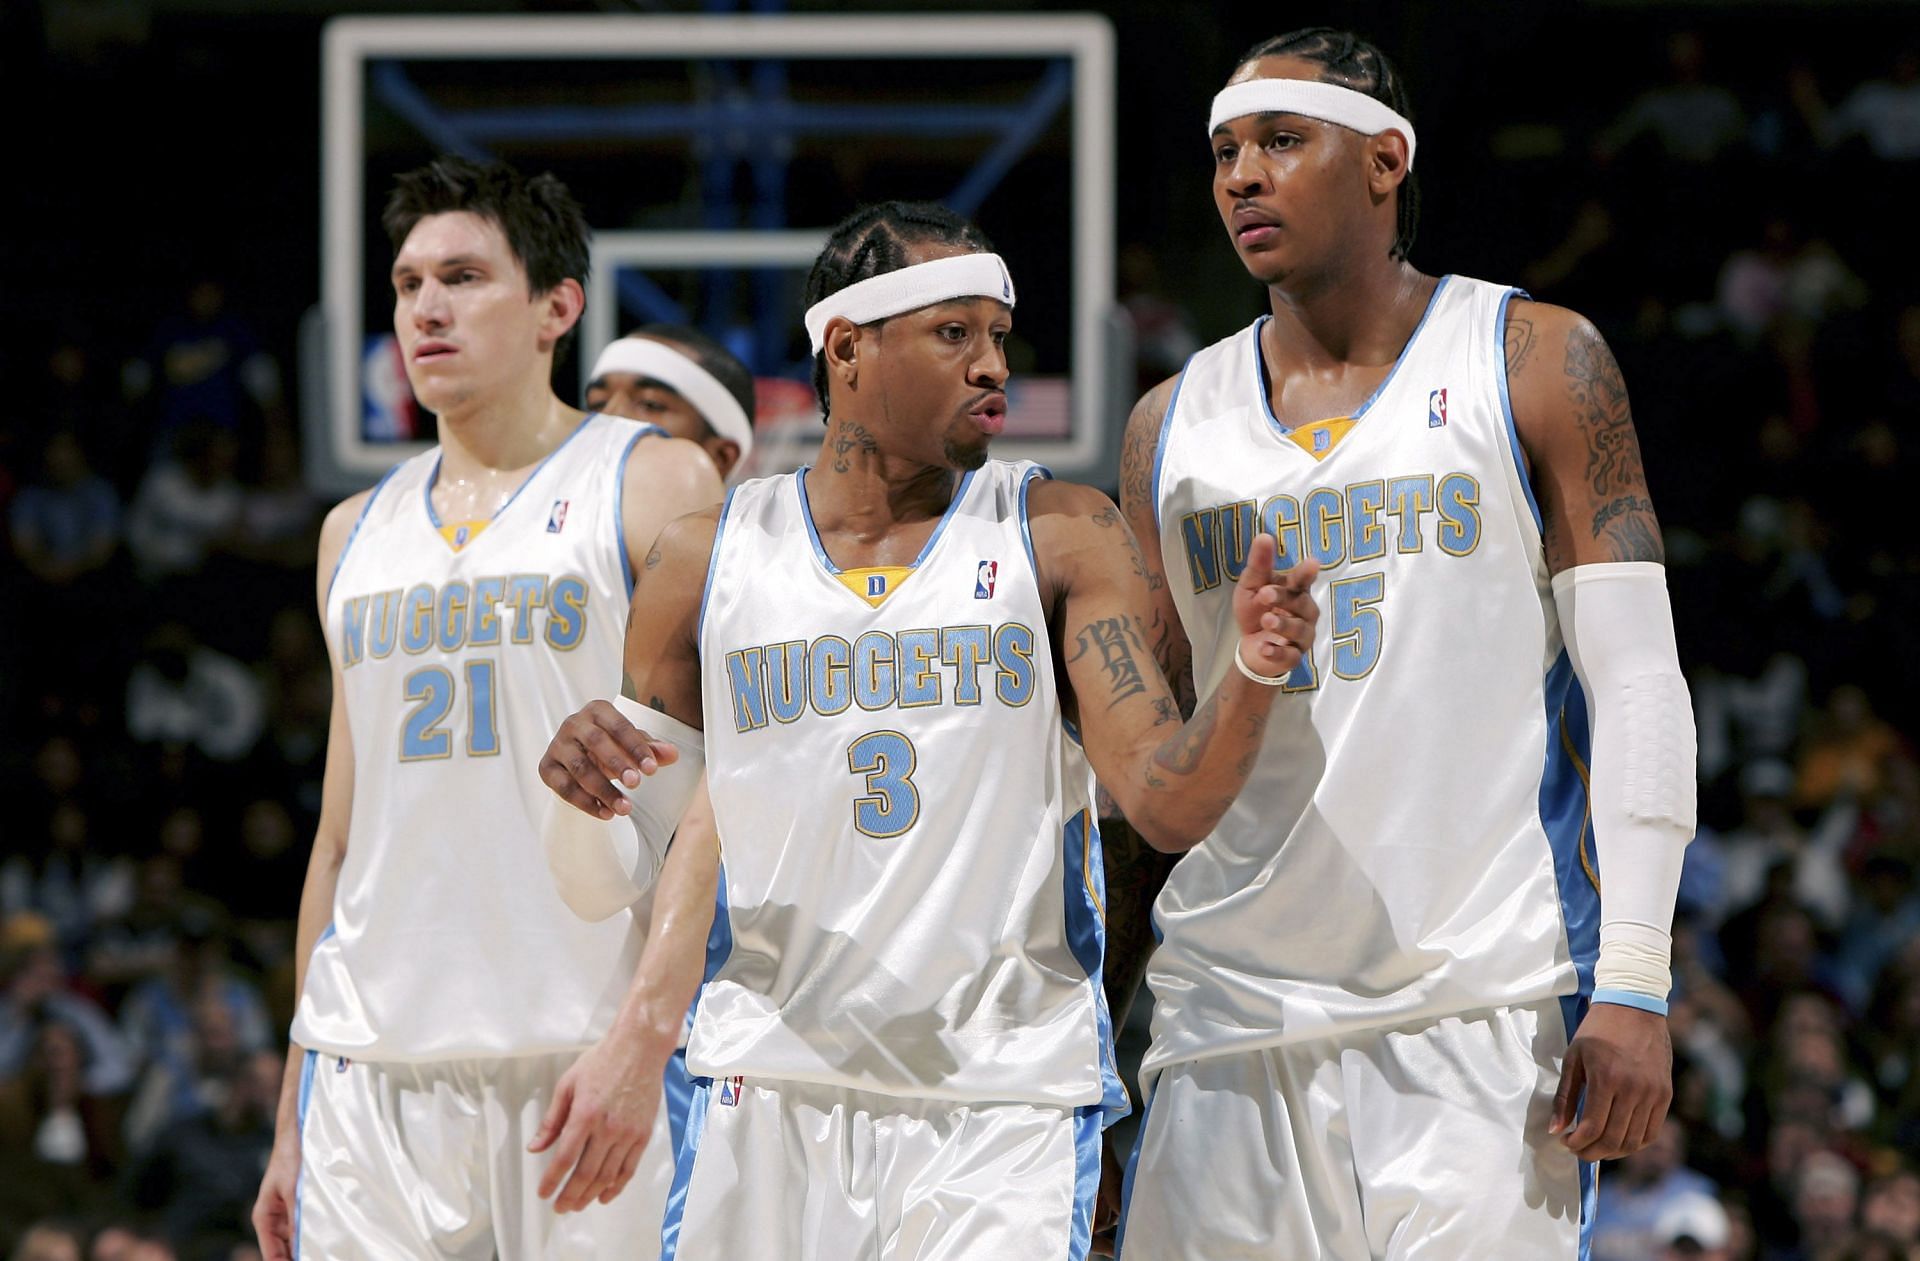 Carmelo Anthony (#15) of the Denver Nuggets after returning from a time out